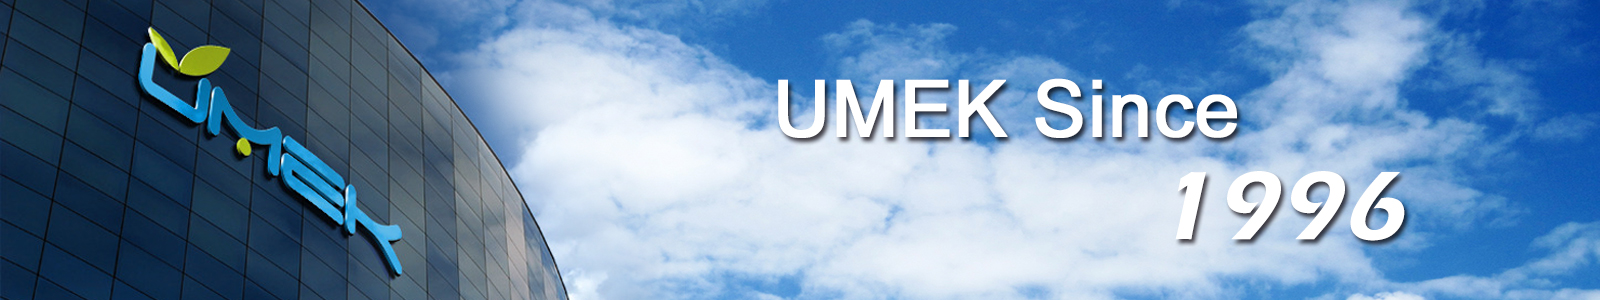 UMEK has specialized in manufacture and customized water treatment equipments & spare parts for 21 years